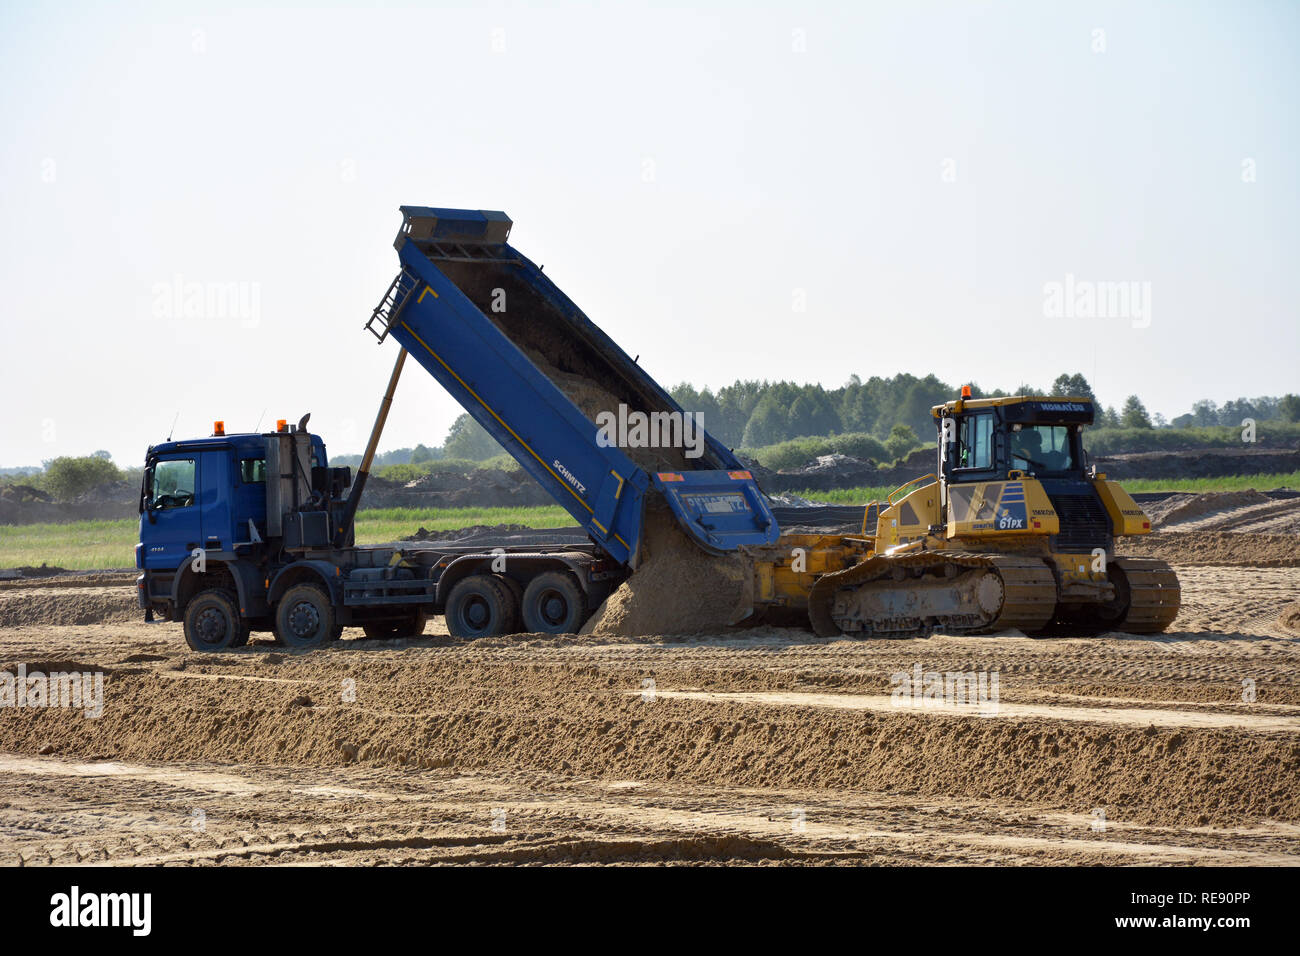 RYNARZEWO, KUJAWSKO-POMORSKIE/POLAND - MAY 25, 2018 - S5 construction site - dark blue tipper discharging a load of sand, yellow caterpillar earth mov Stock Photo